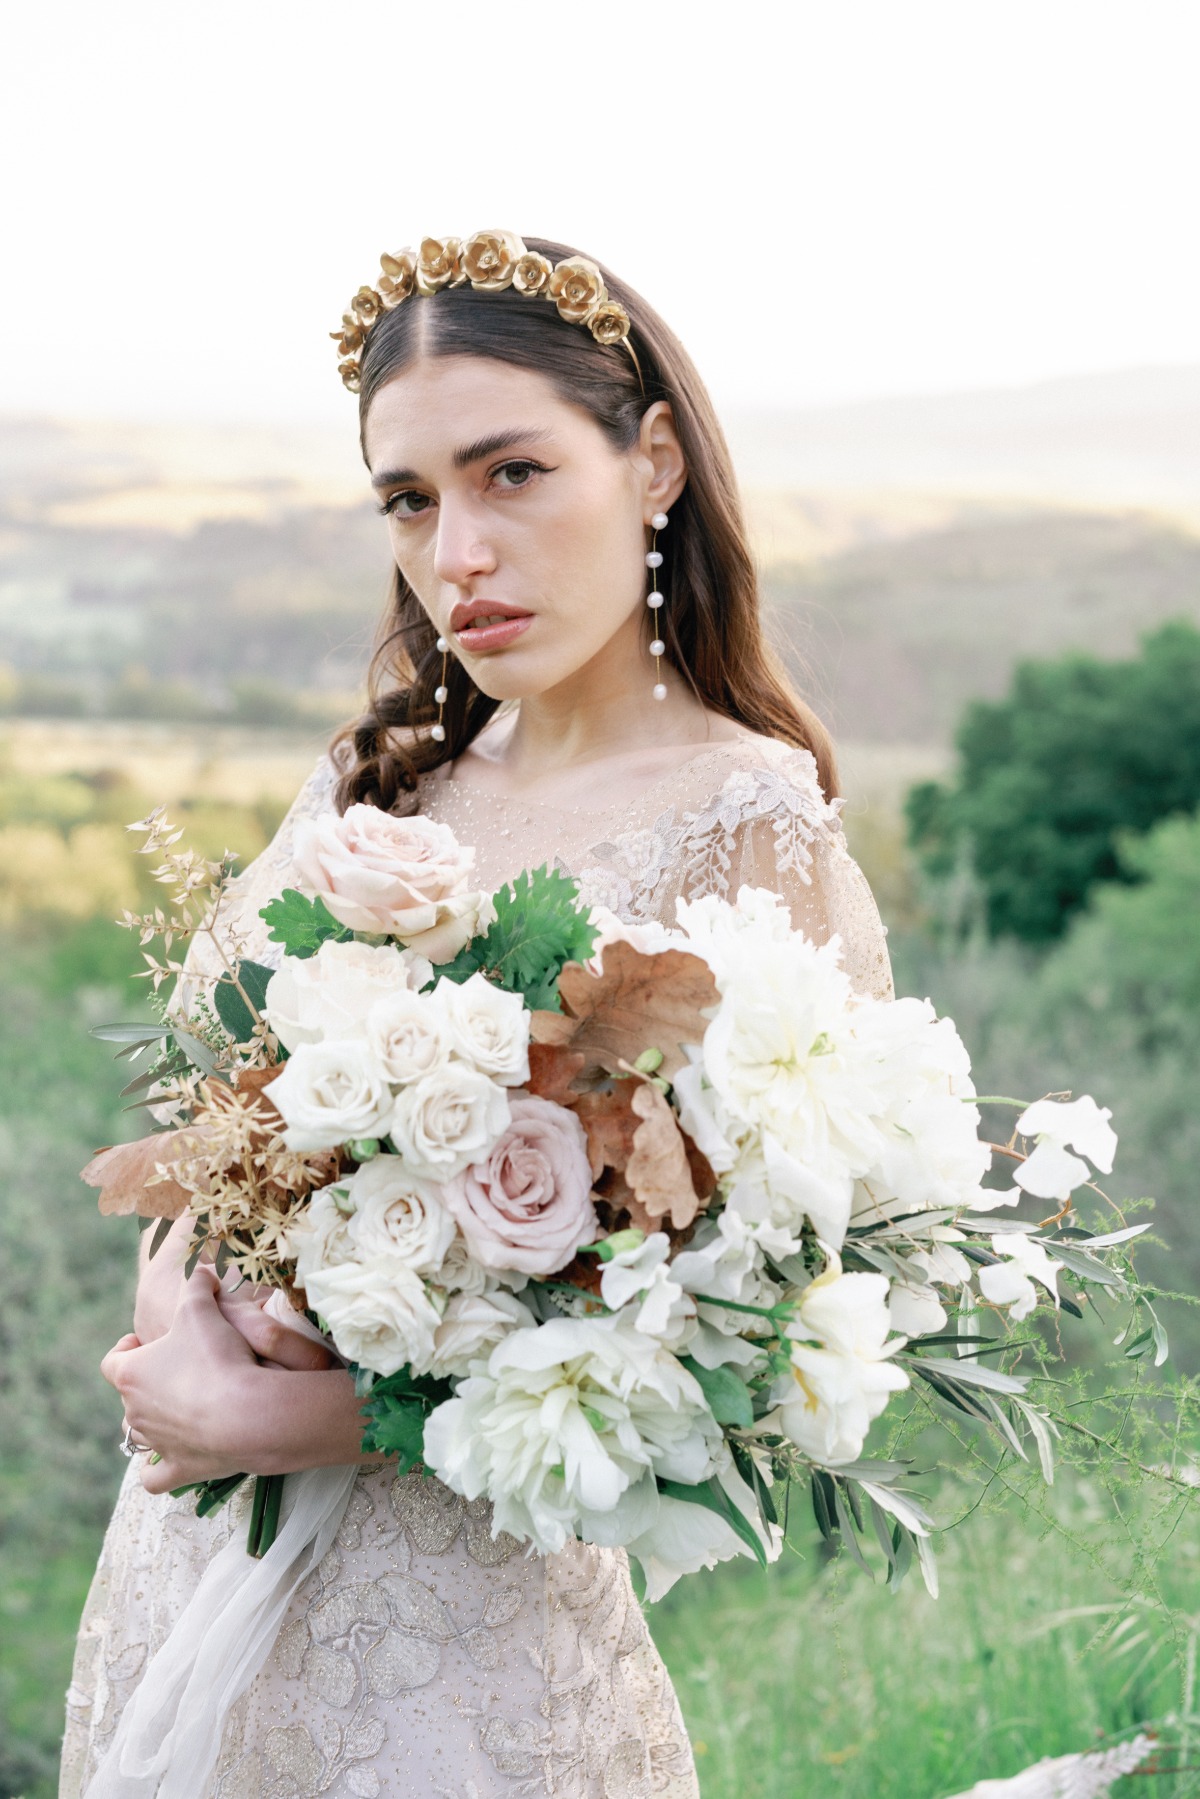 Ethereal gold headpiece to match dreamy couture wedding gown 